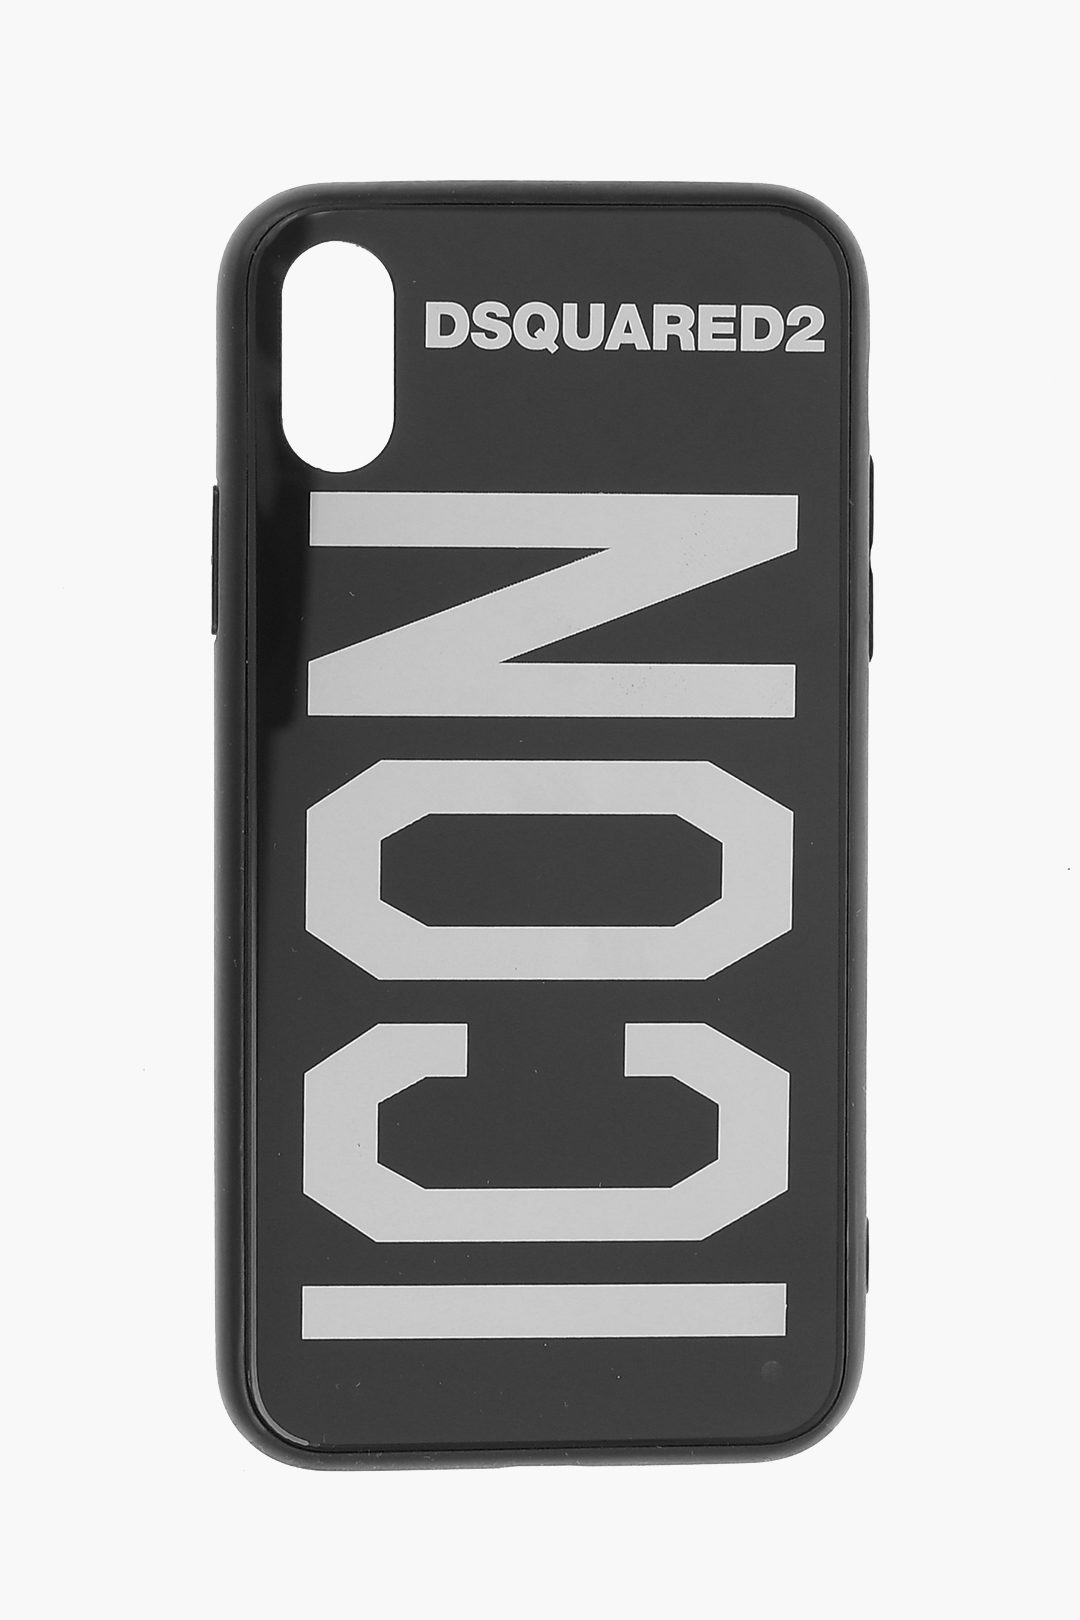 flauw Premisse ontspannen Dsquared2 Printed iPhone X/XS Cover unisex men women - Glamood Outlet